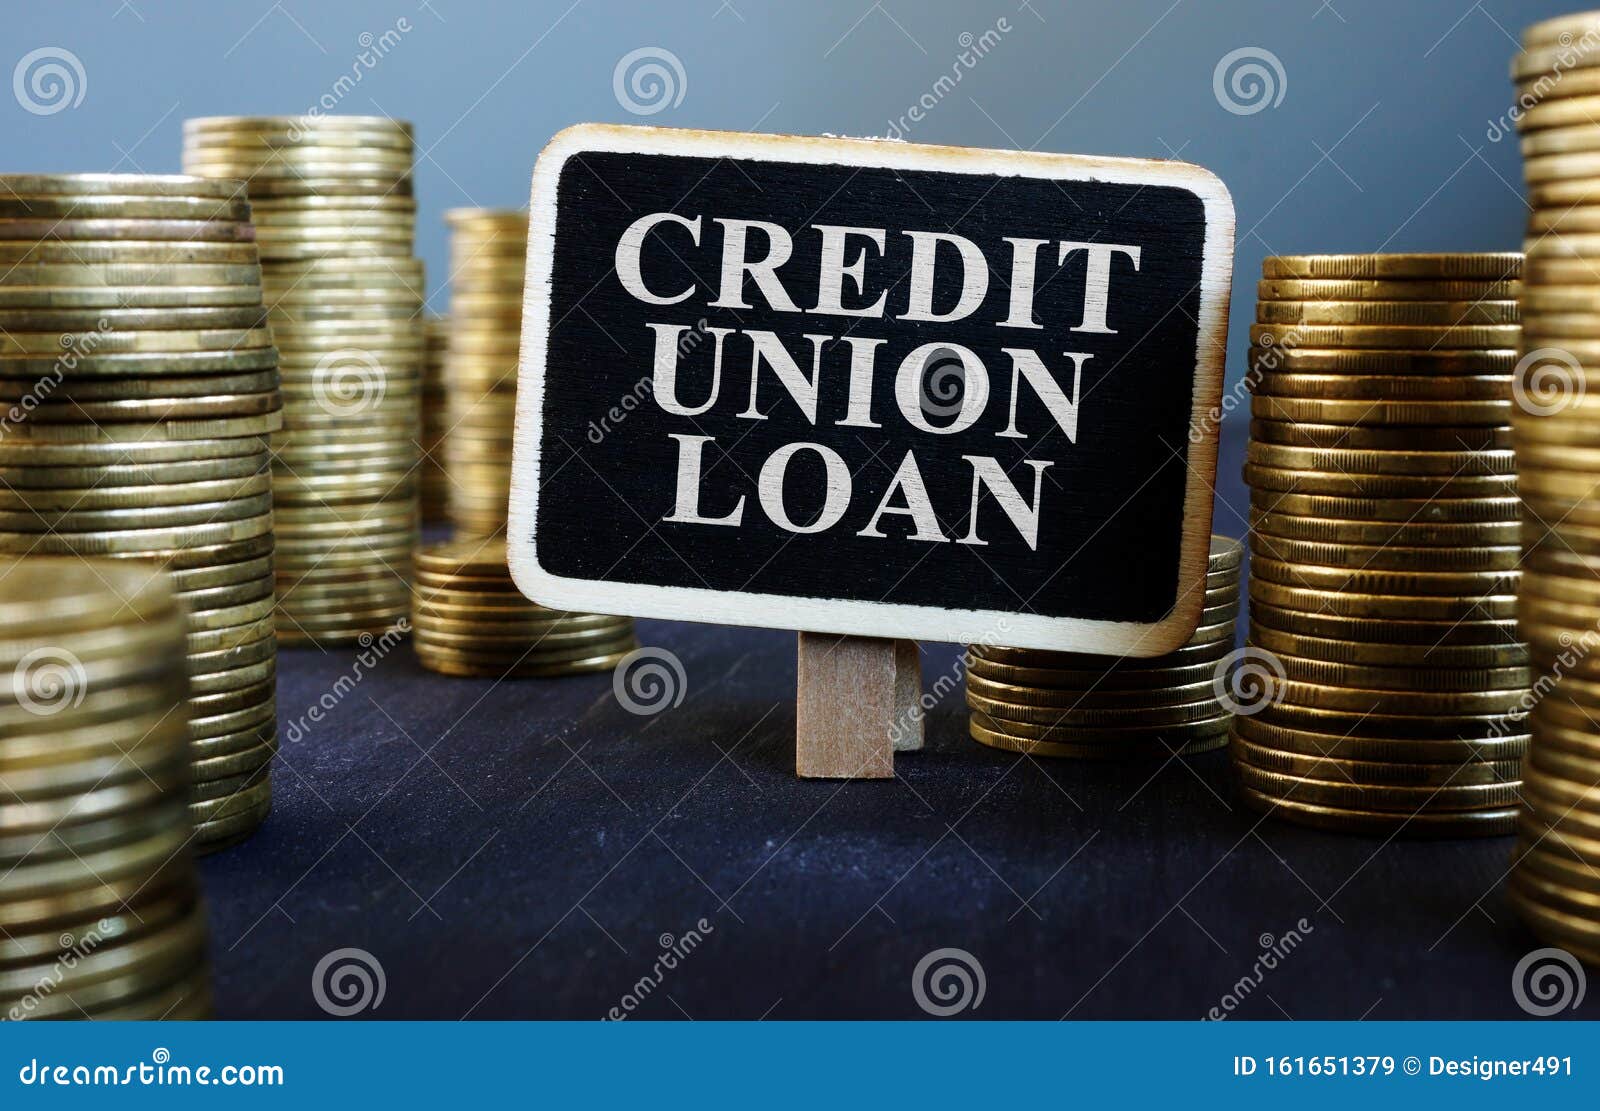 credit union loan sign on wooden plate and money